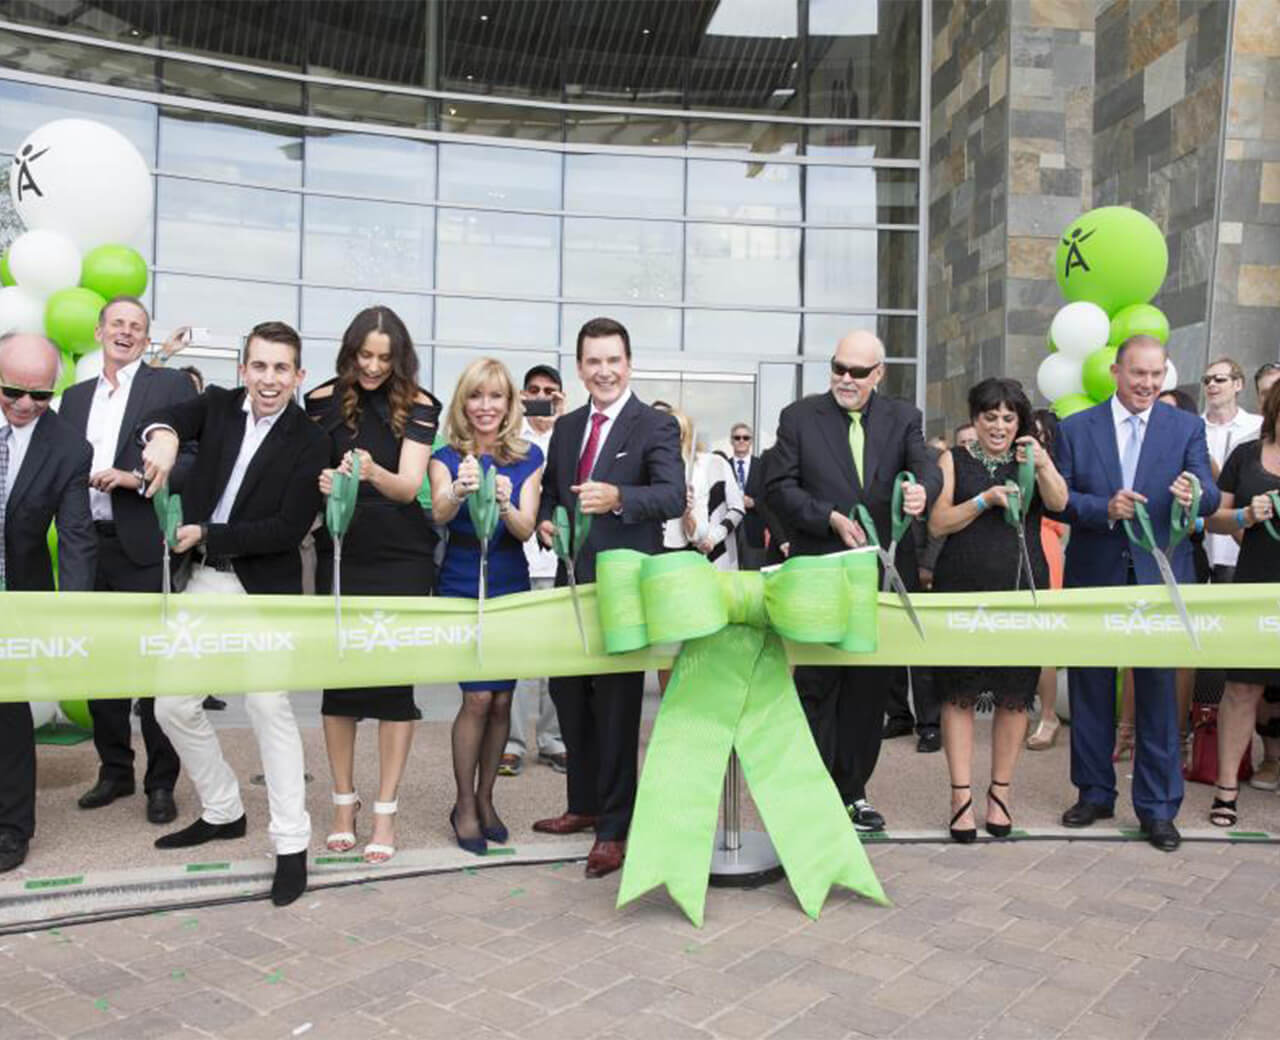 Isagenix employees cutting a large green ribbon outside a new building